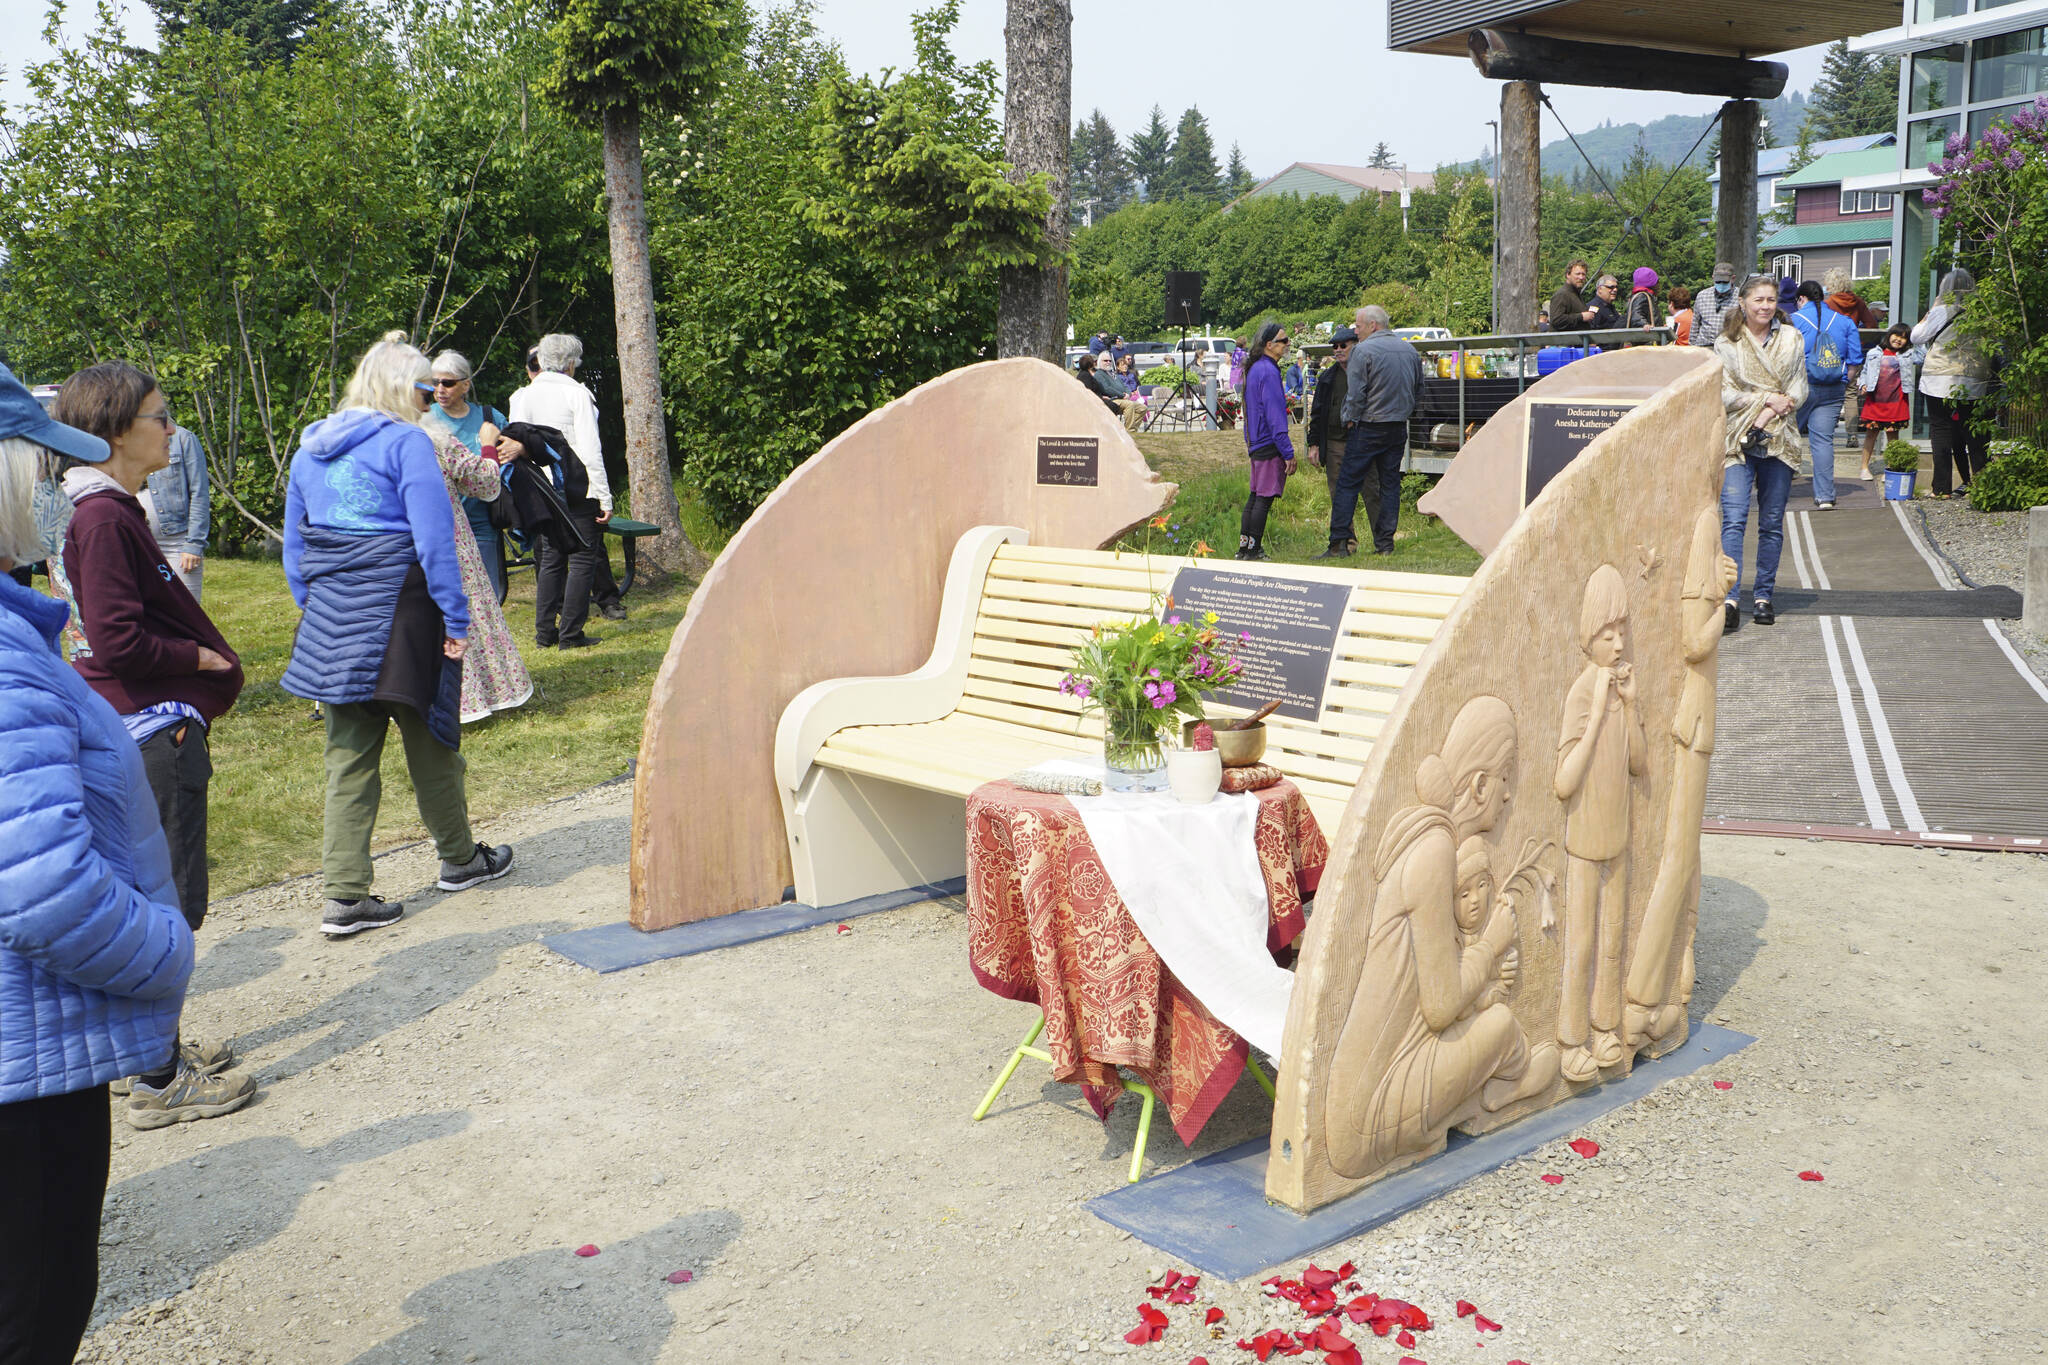 People visit at the Loved & Lost Memorial Bench on Sunday, June 12, 2022, at the Homer Public Library in Homer, Alaska, for a memorial for Anesha "Duffy" Murnane and the dedication of the bench. (Photo by Michael Armstrong/Homer News)